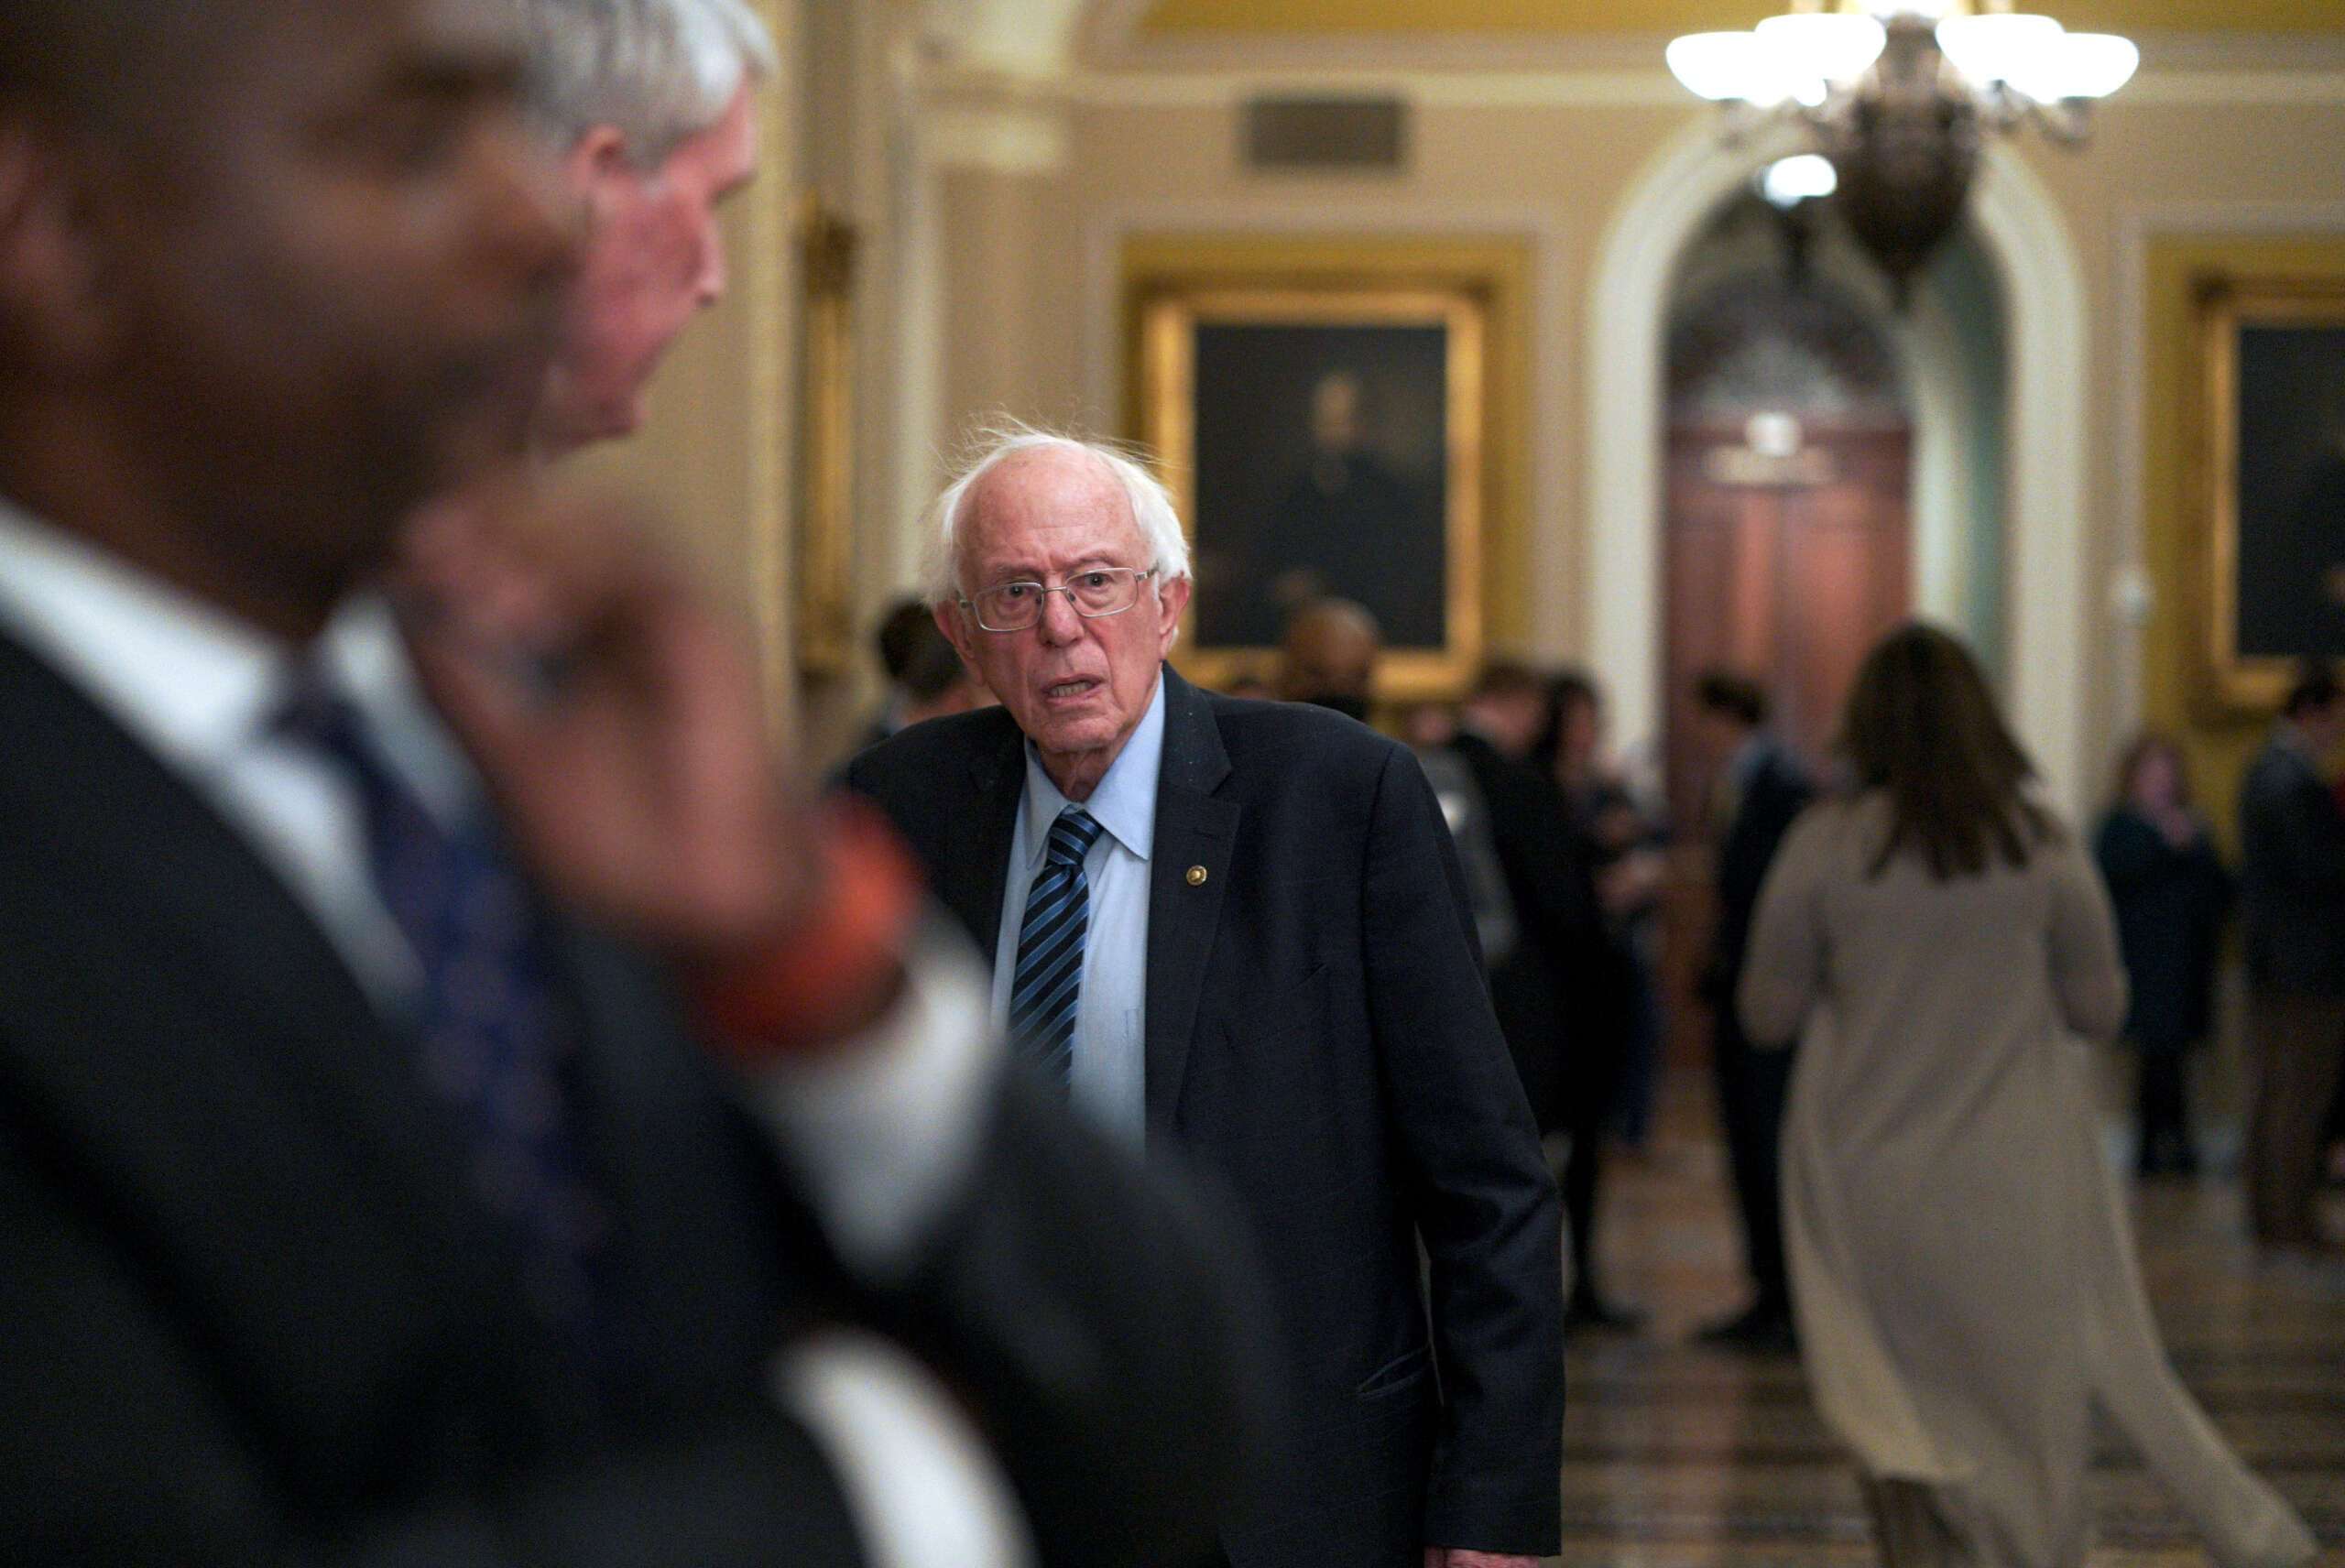 image for Sanders Casts Sole Democratic Vote Against Bill to Send $14B to Israel